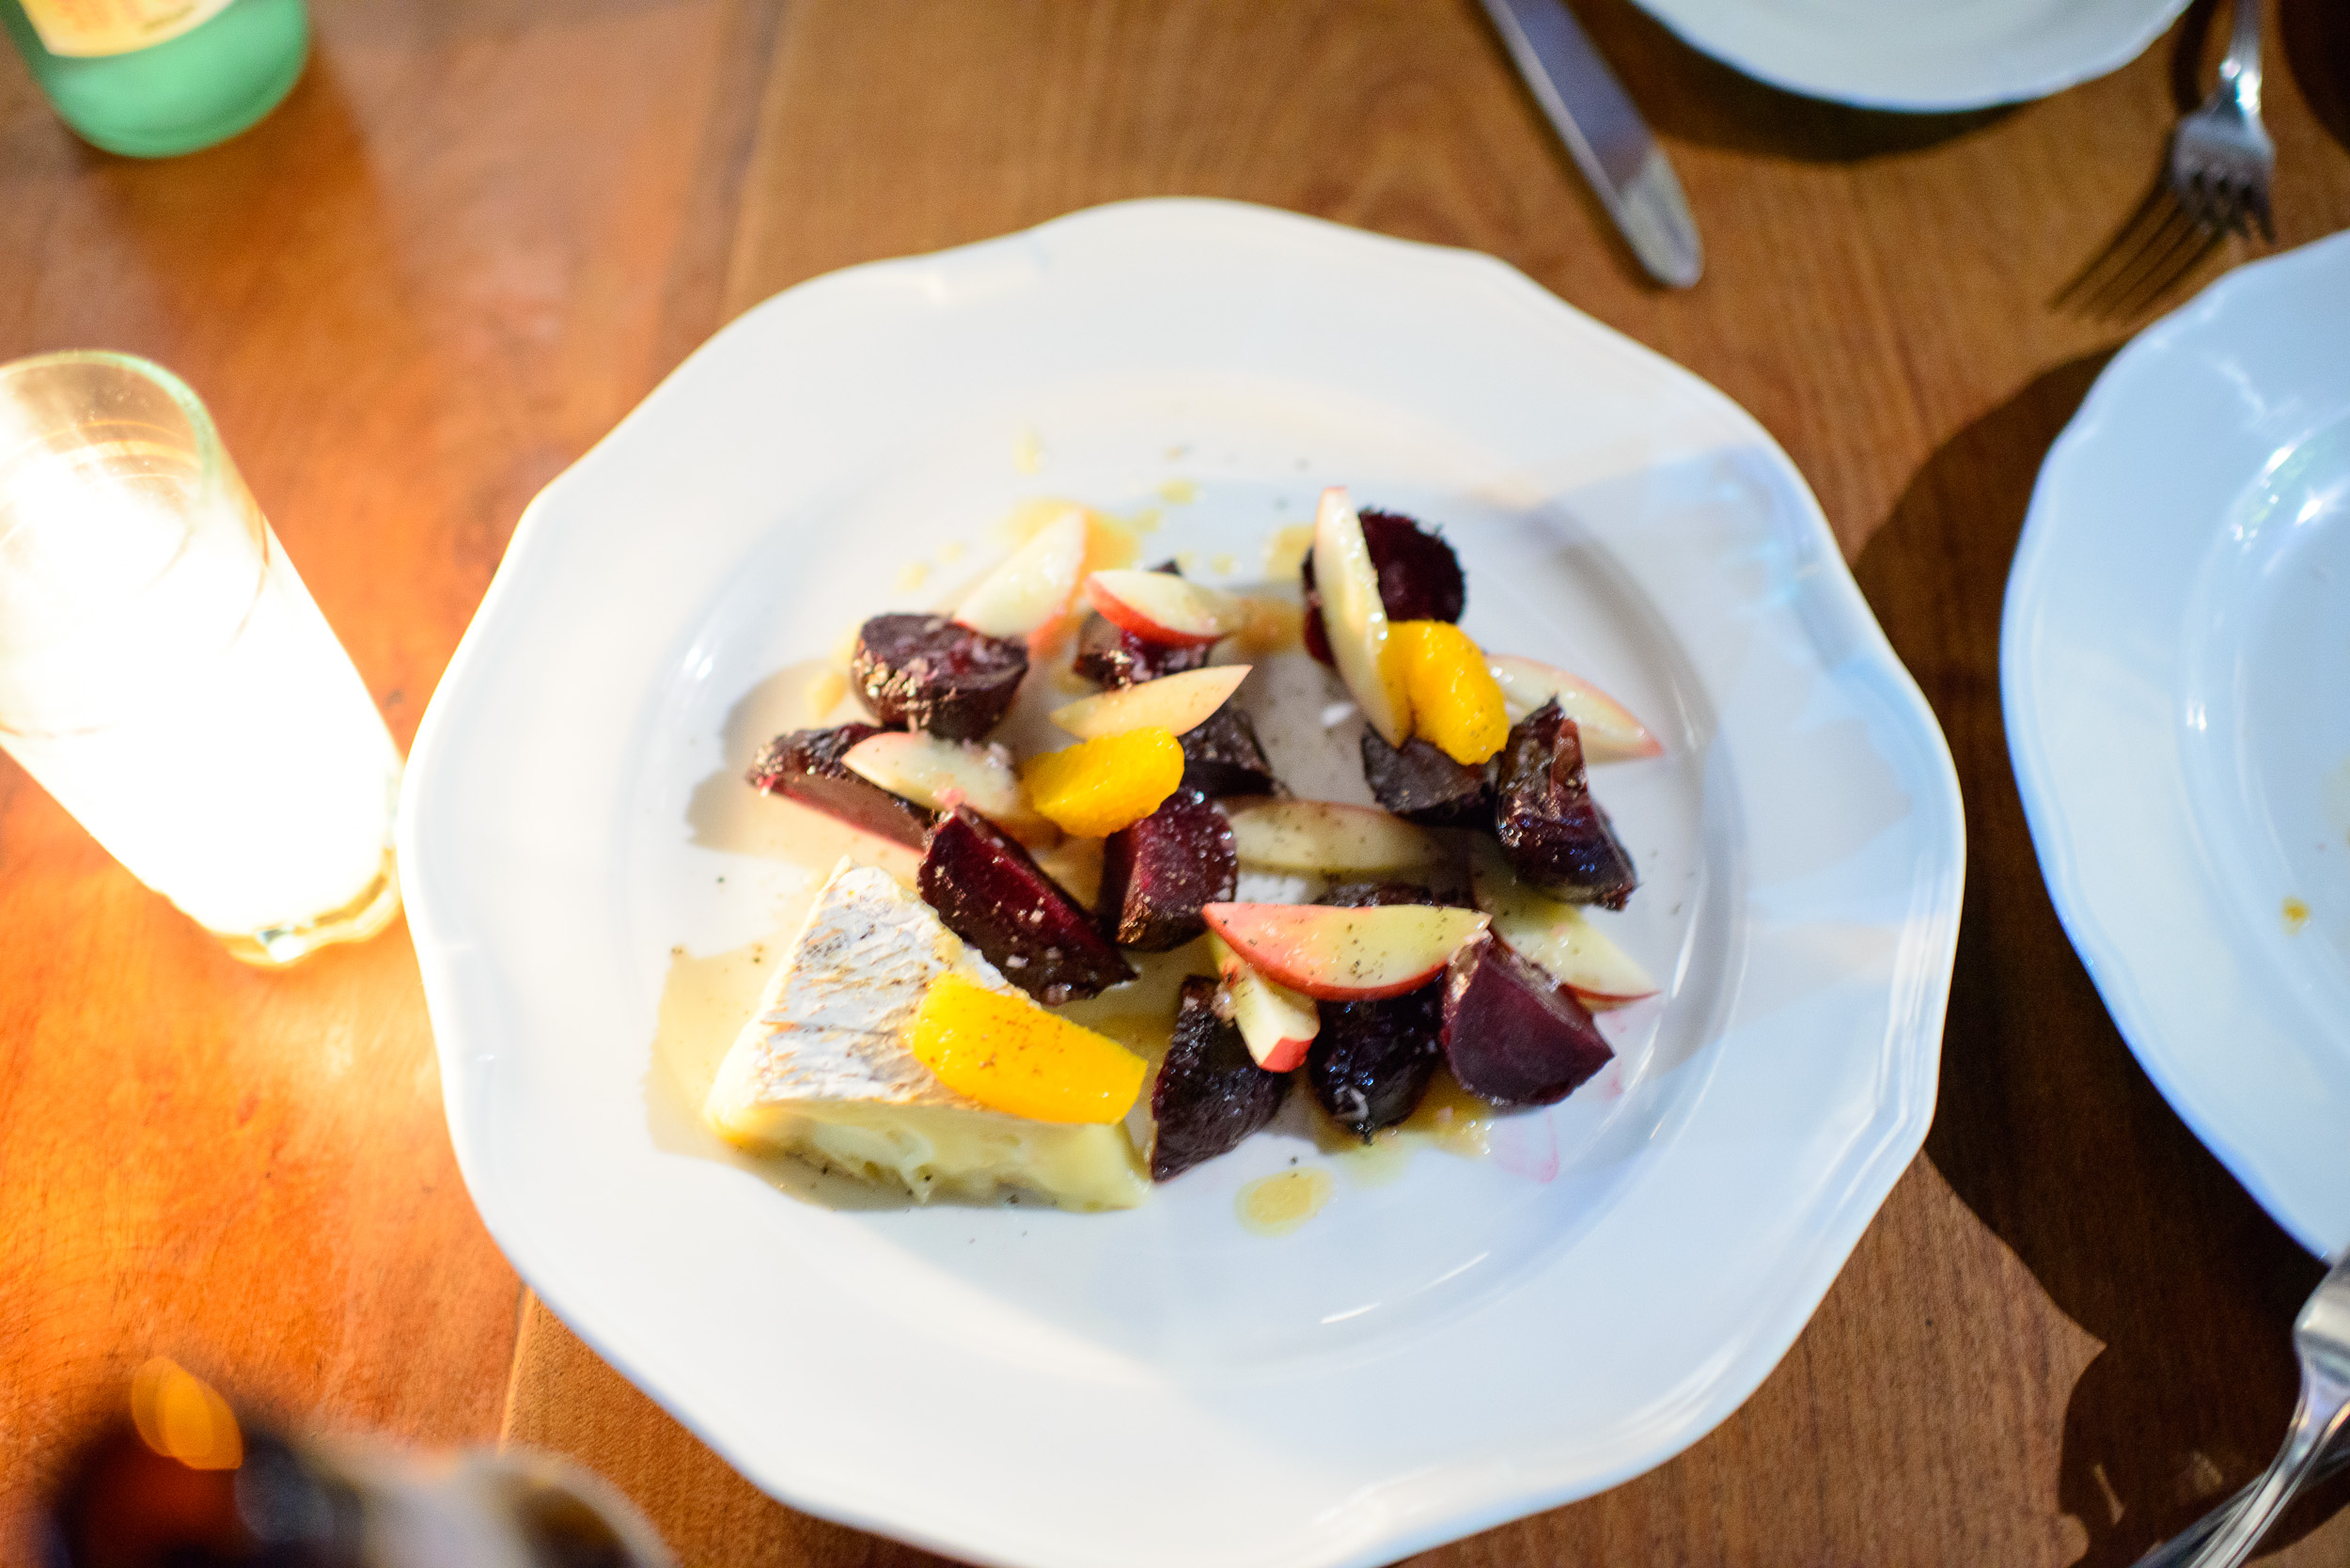 Roasted beets, orange, nectarines, and local cheese